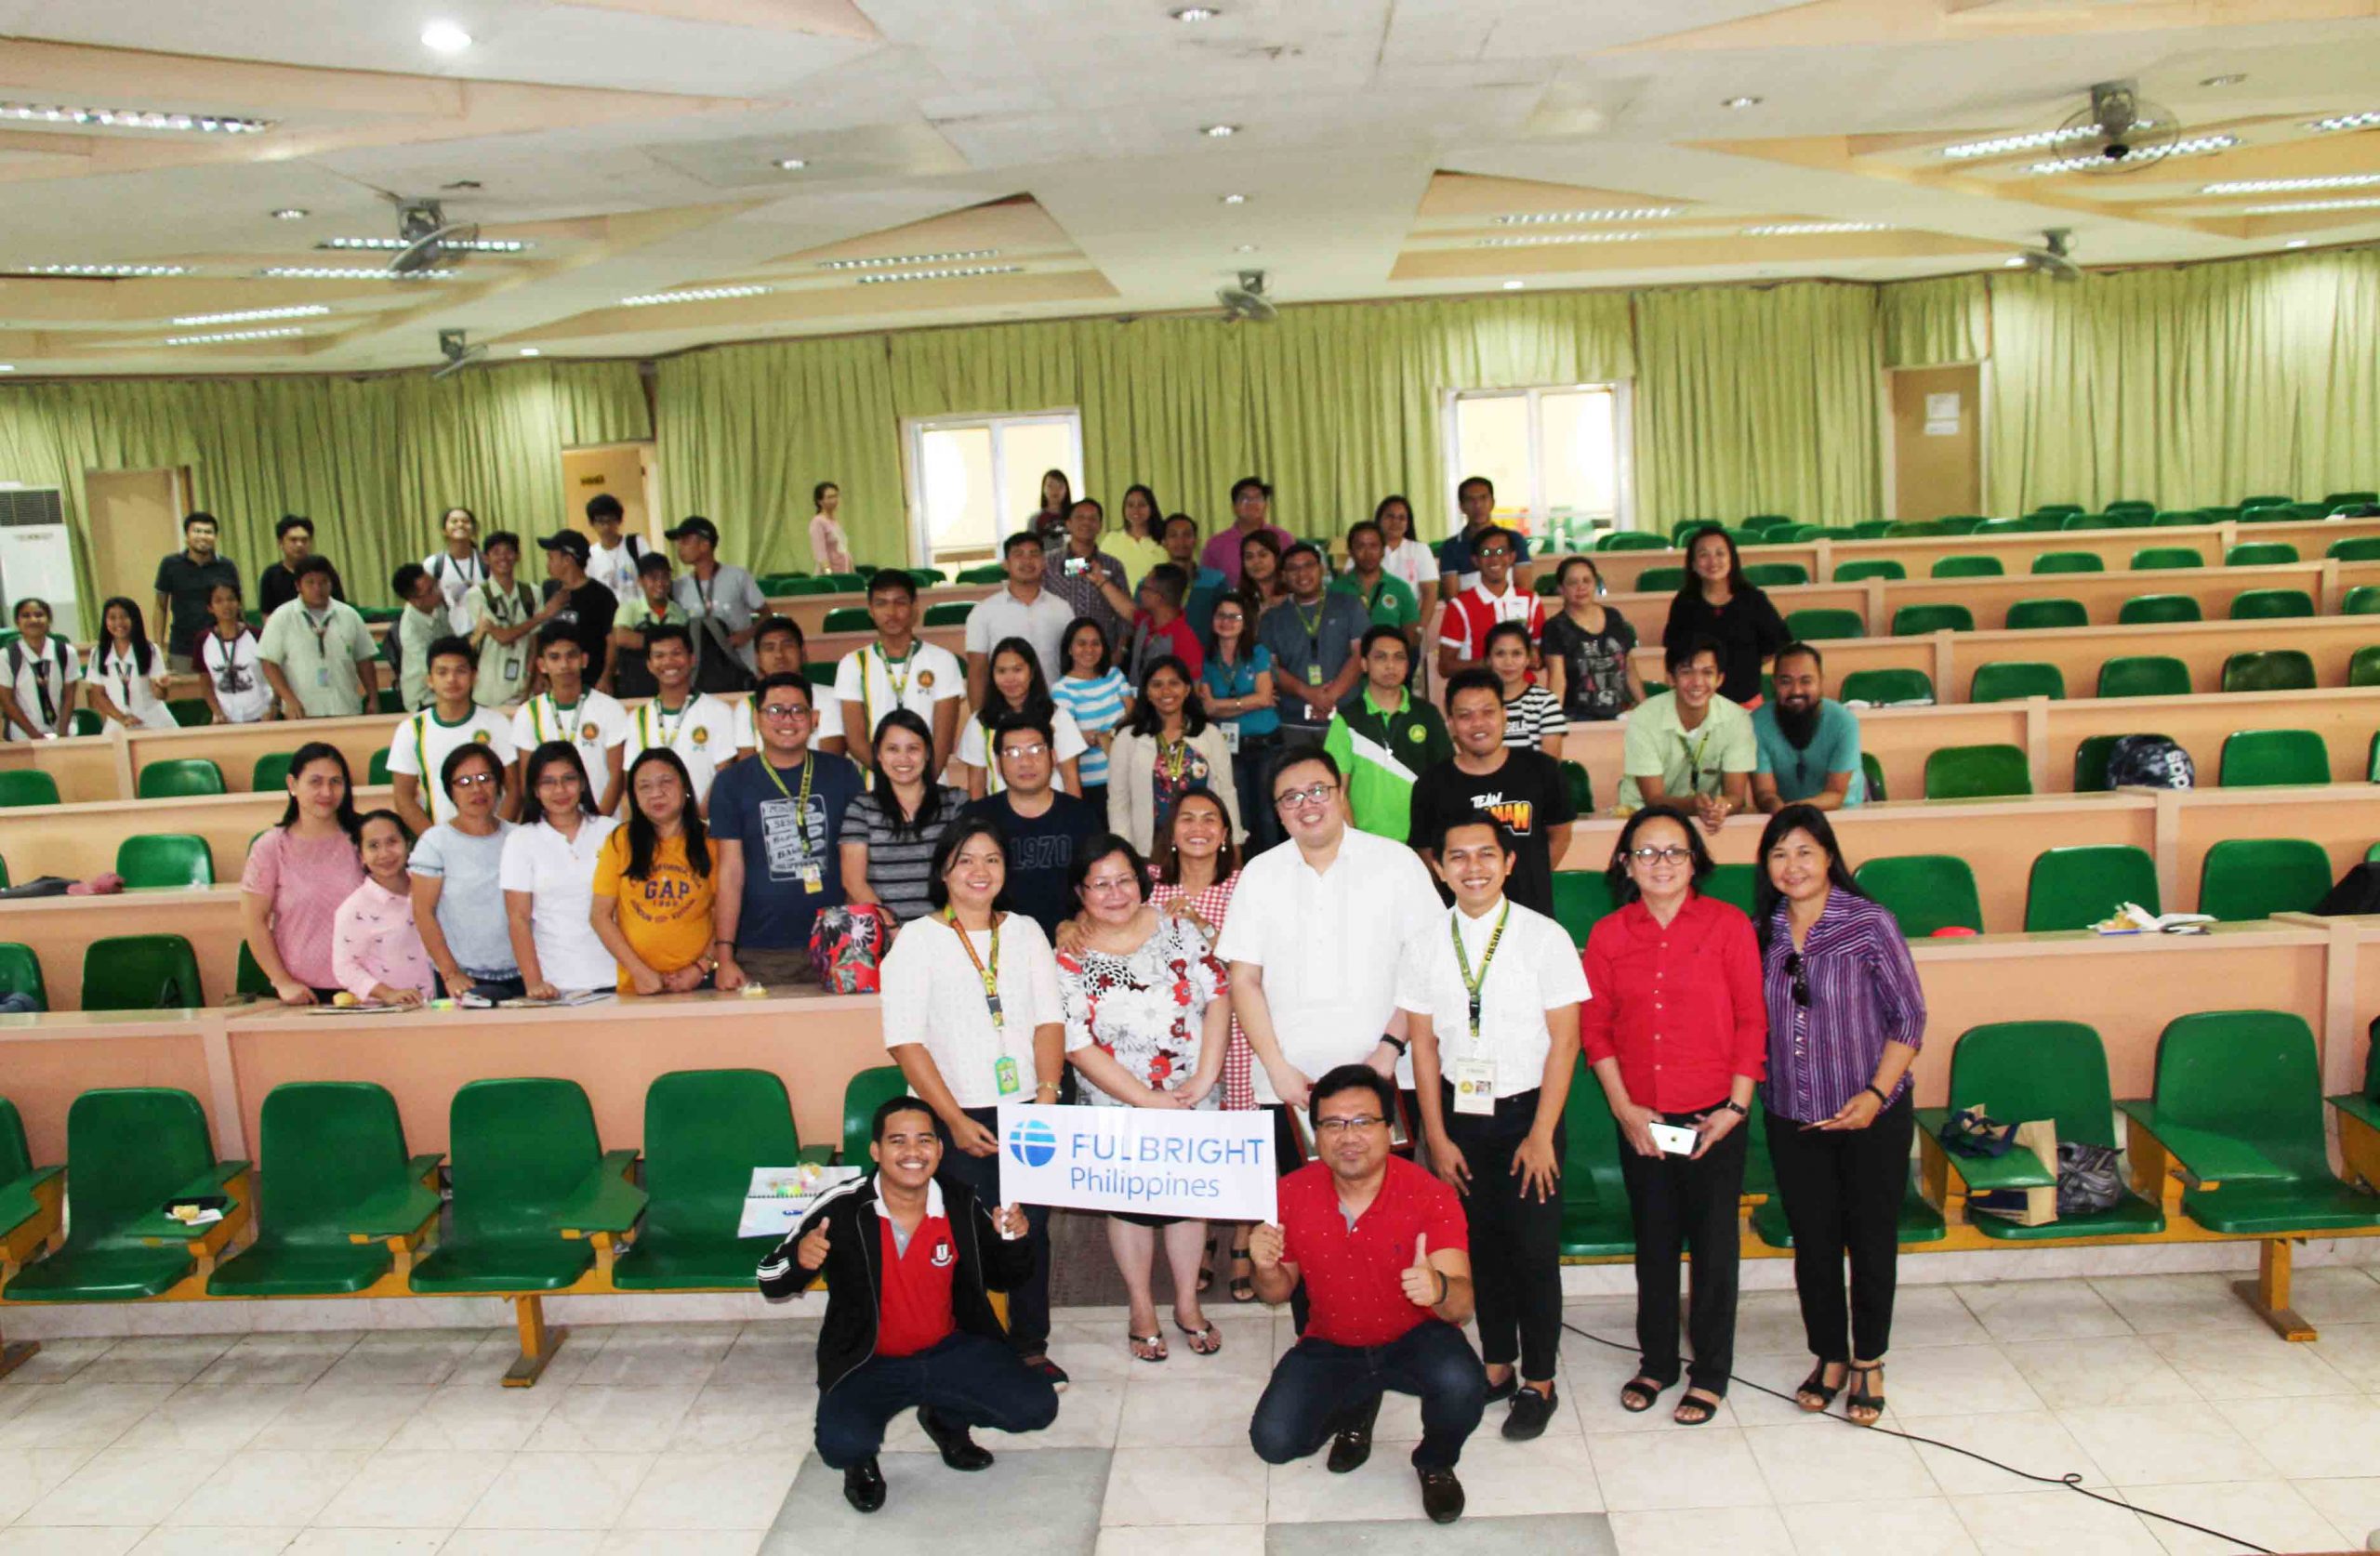 Fulbright Philippines promotes US scholarships at CBSUA